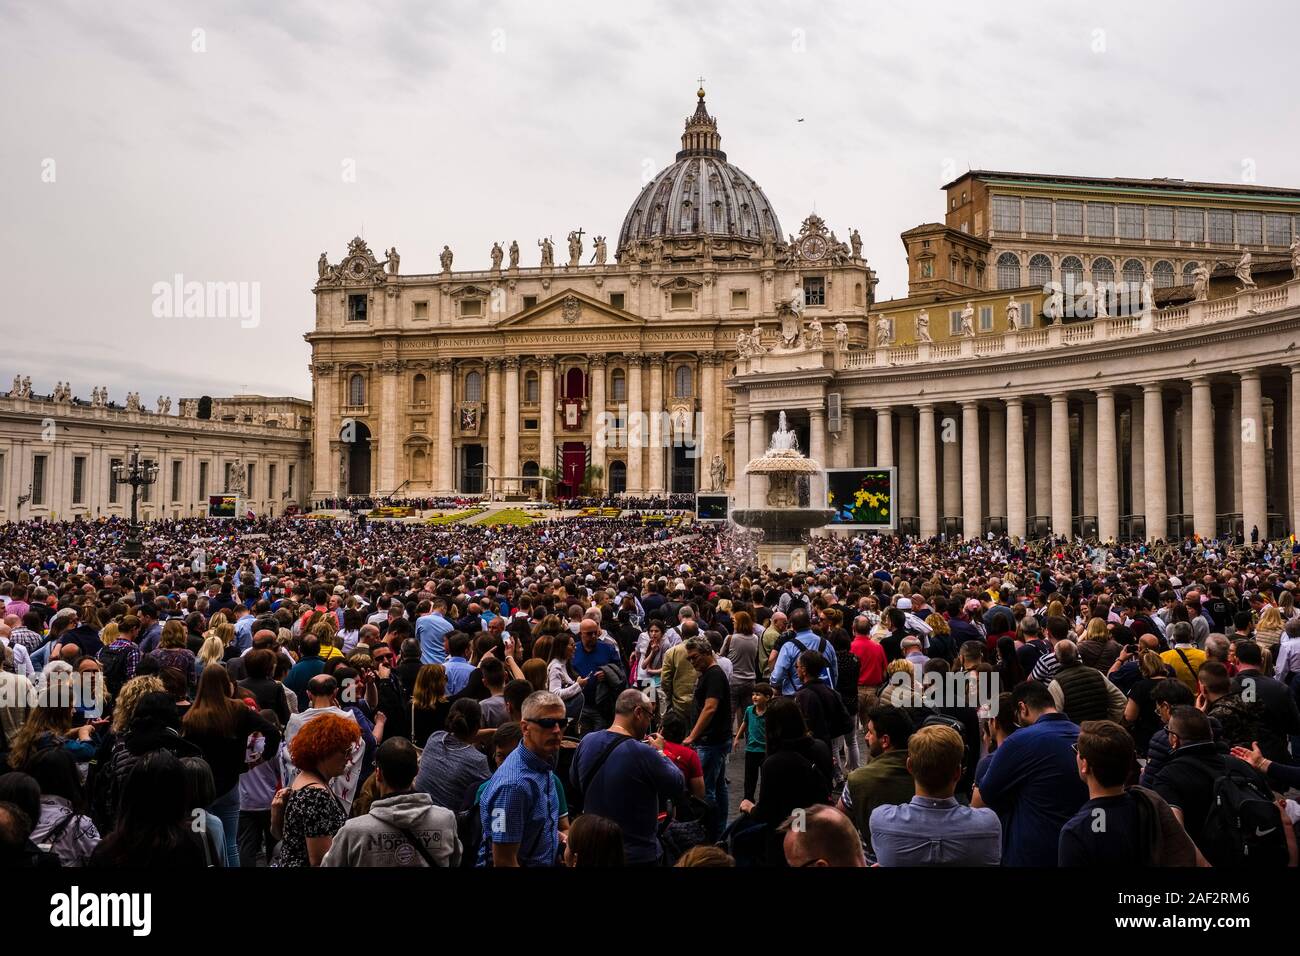 View over St. Peter's Square with thousands of people joining the Easter sermon of the Pope, the Papal Basilica of St. Peter, St. Peter's Basilica in Stock Photo